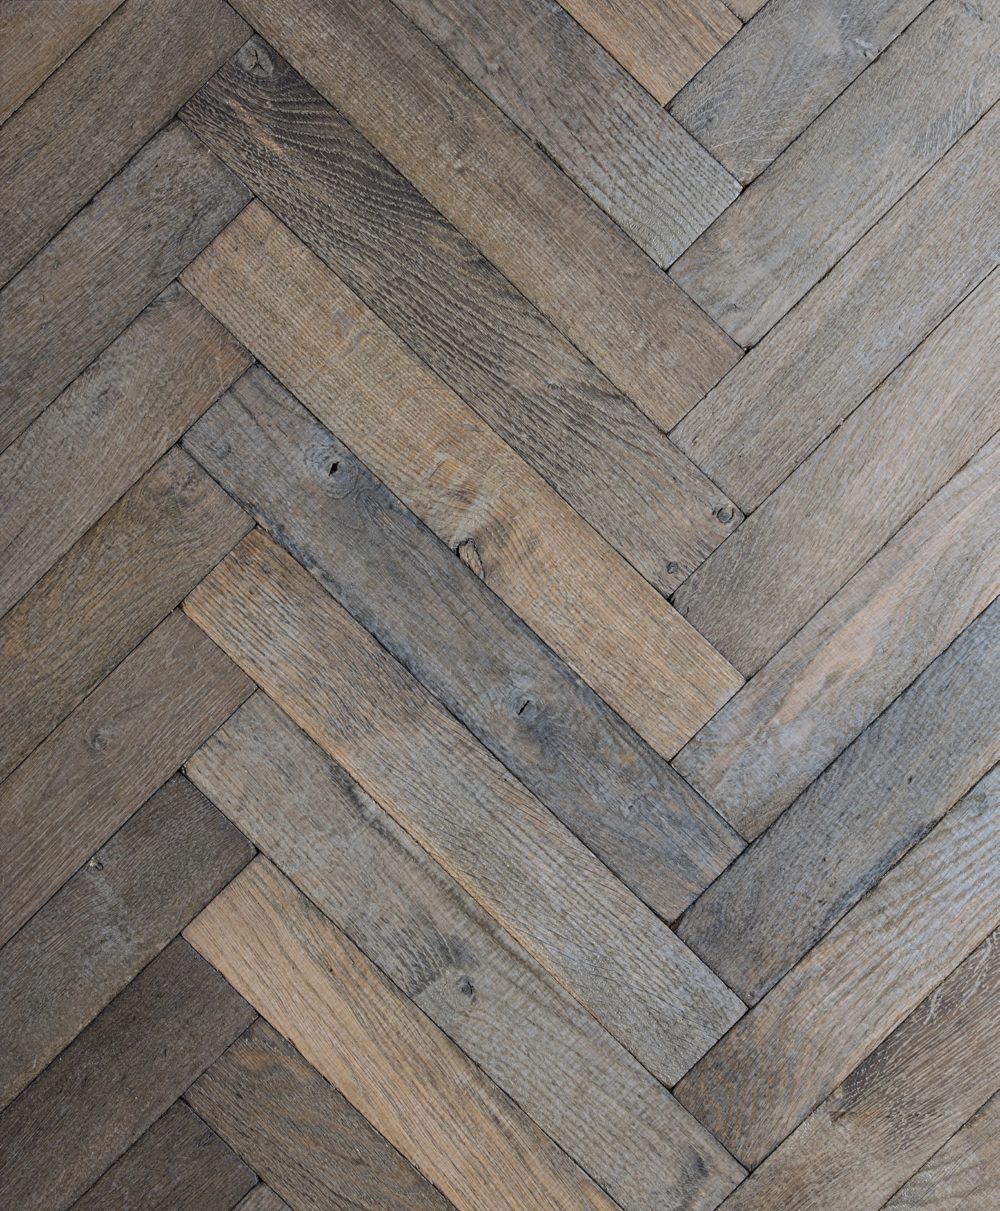 Barn Oak-Parquet-Solid-Distressed-Rustic-Oiled